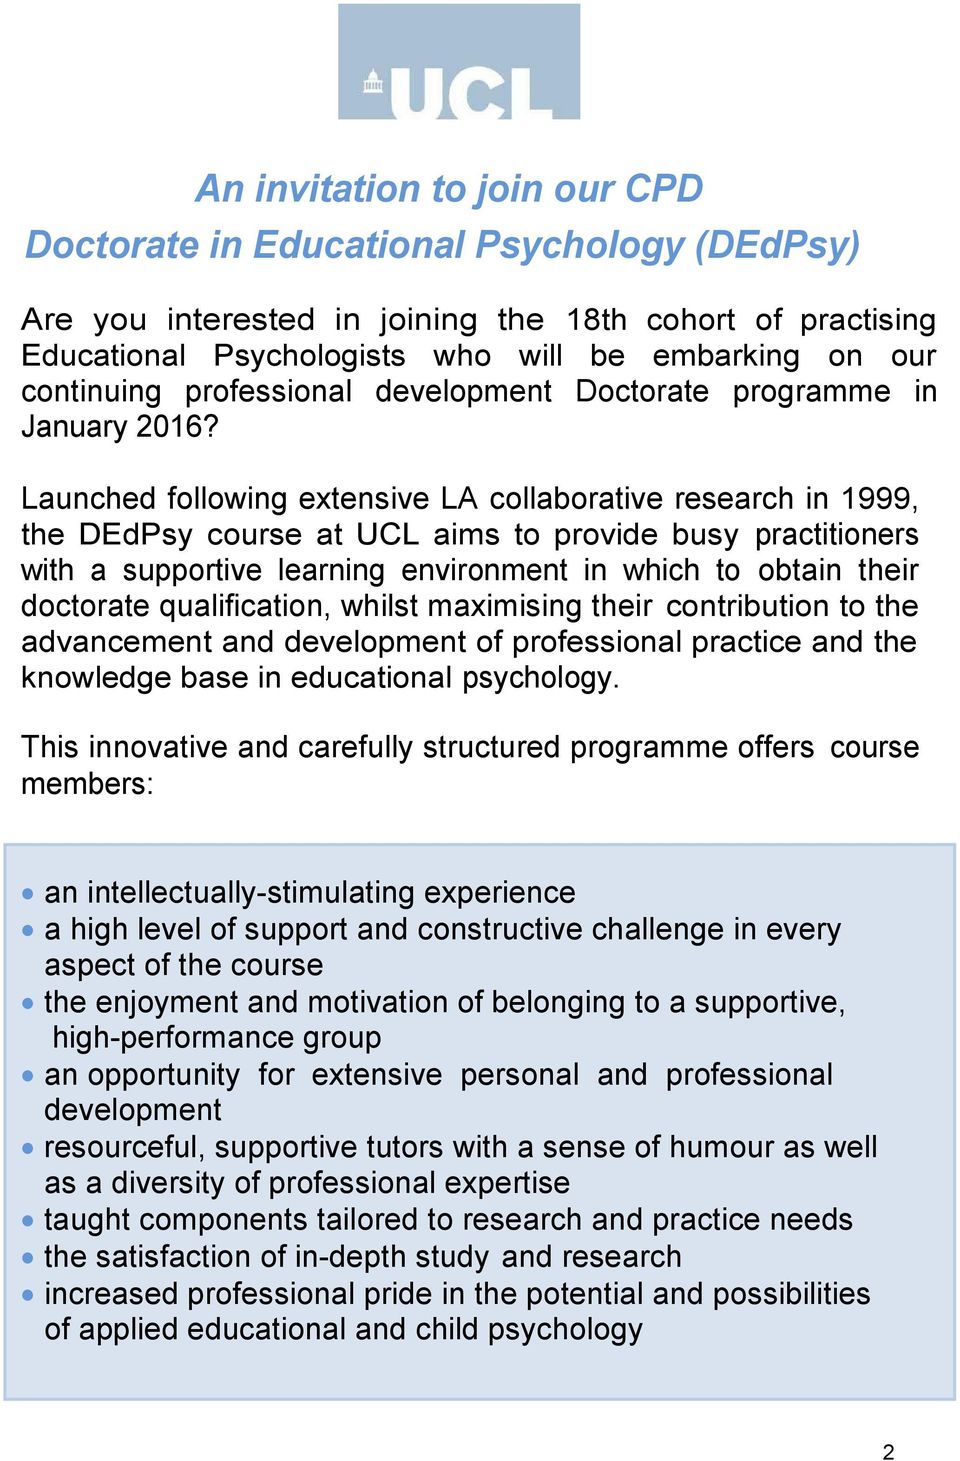 Launched following extensive LA collaborative research in 1999, the DEdPsy course at UCL aims to provide busy practitioners with a supportive learning environment in which to obtain their doctorate